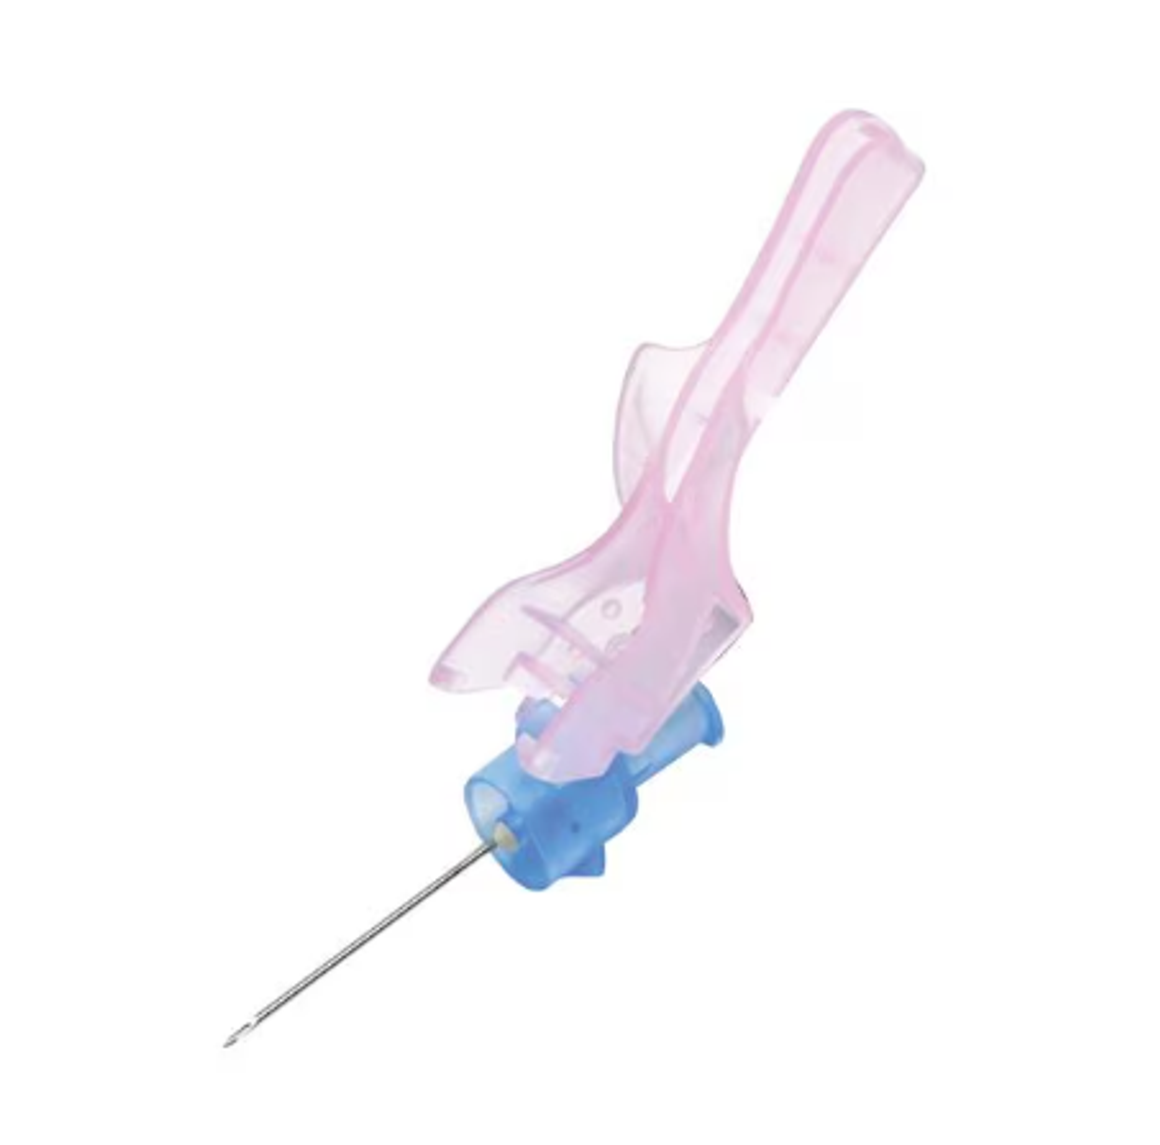 BD Needle Syringe/Needle 23gx1-1/2" Safety Low Dead Space